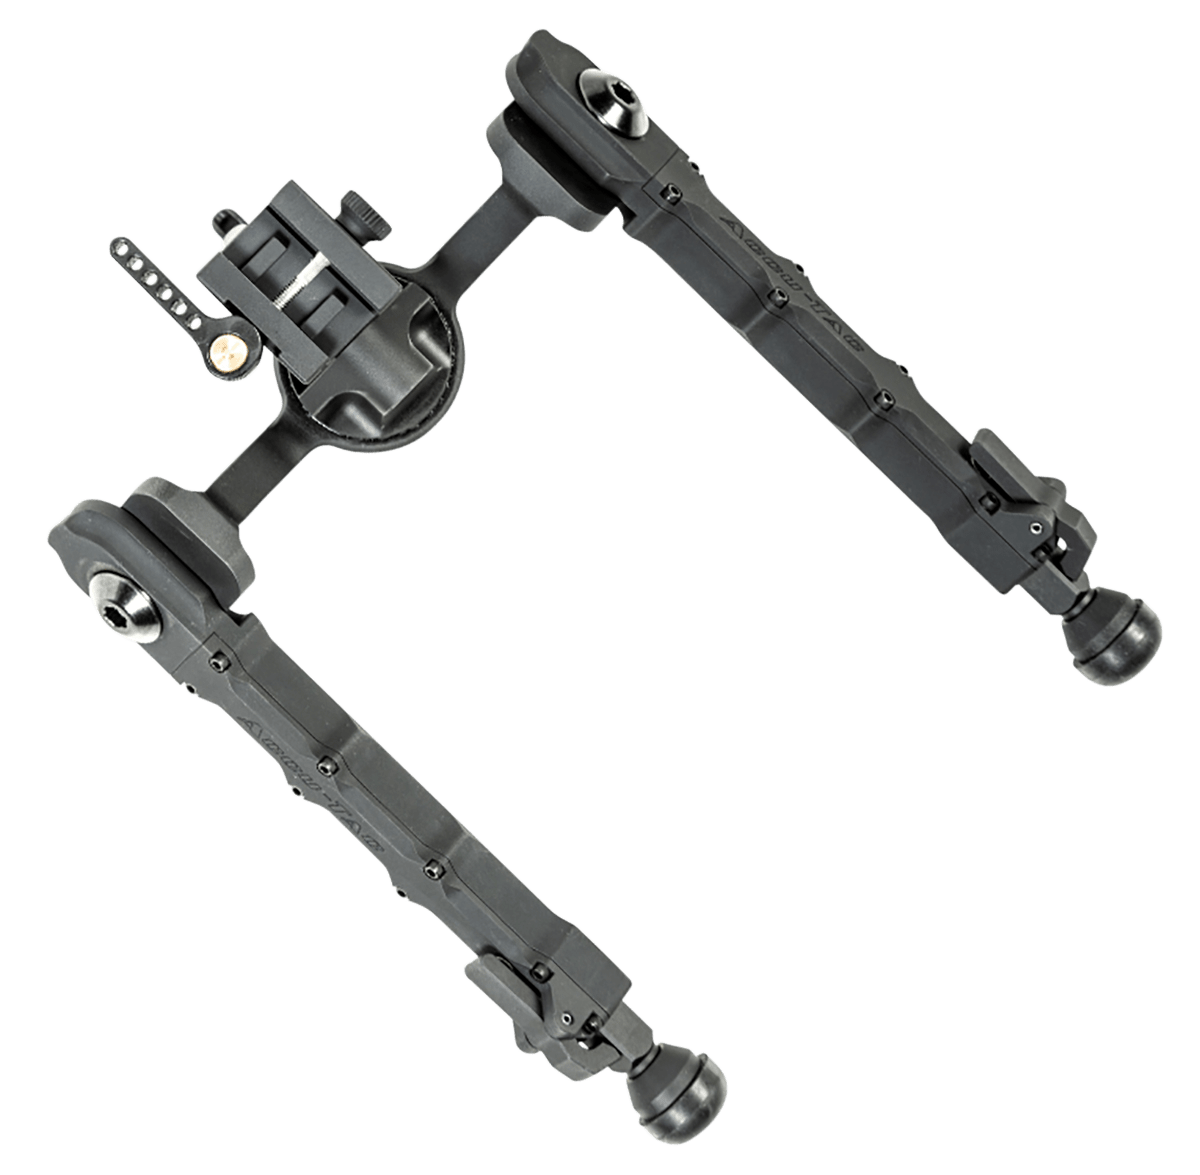 Accu-Tac Accu-Tac FC-5 G2 Bipod made of Black Hardcoat Anodized Aluminum with Picatinny Attachment, Steel Feet & 6"-10.60" Vertical Adjustment; FCSRBG200 Bipods